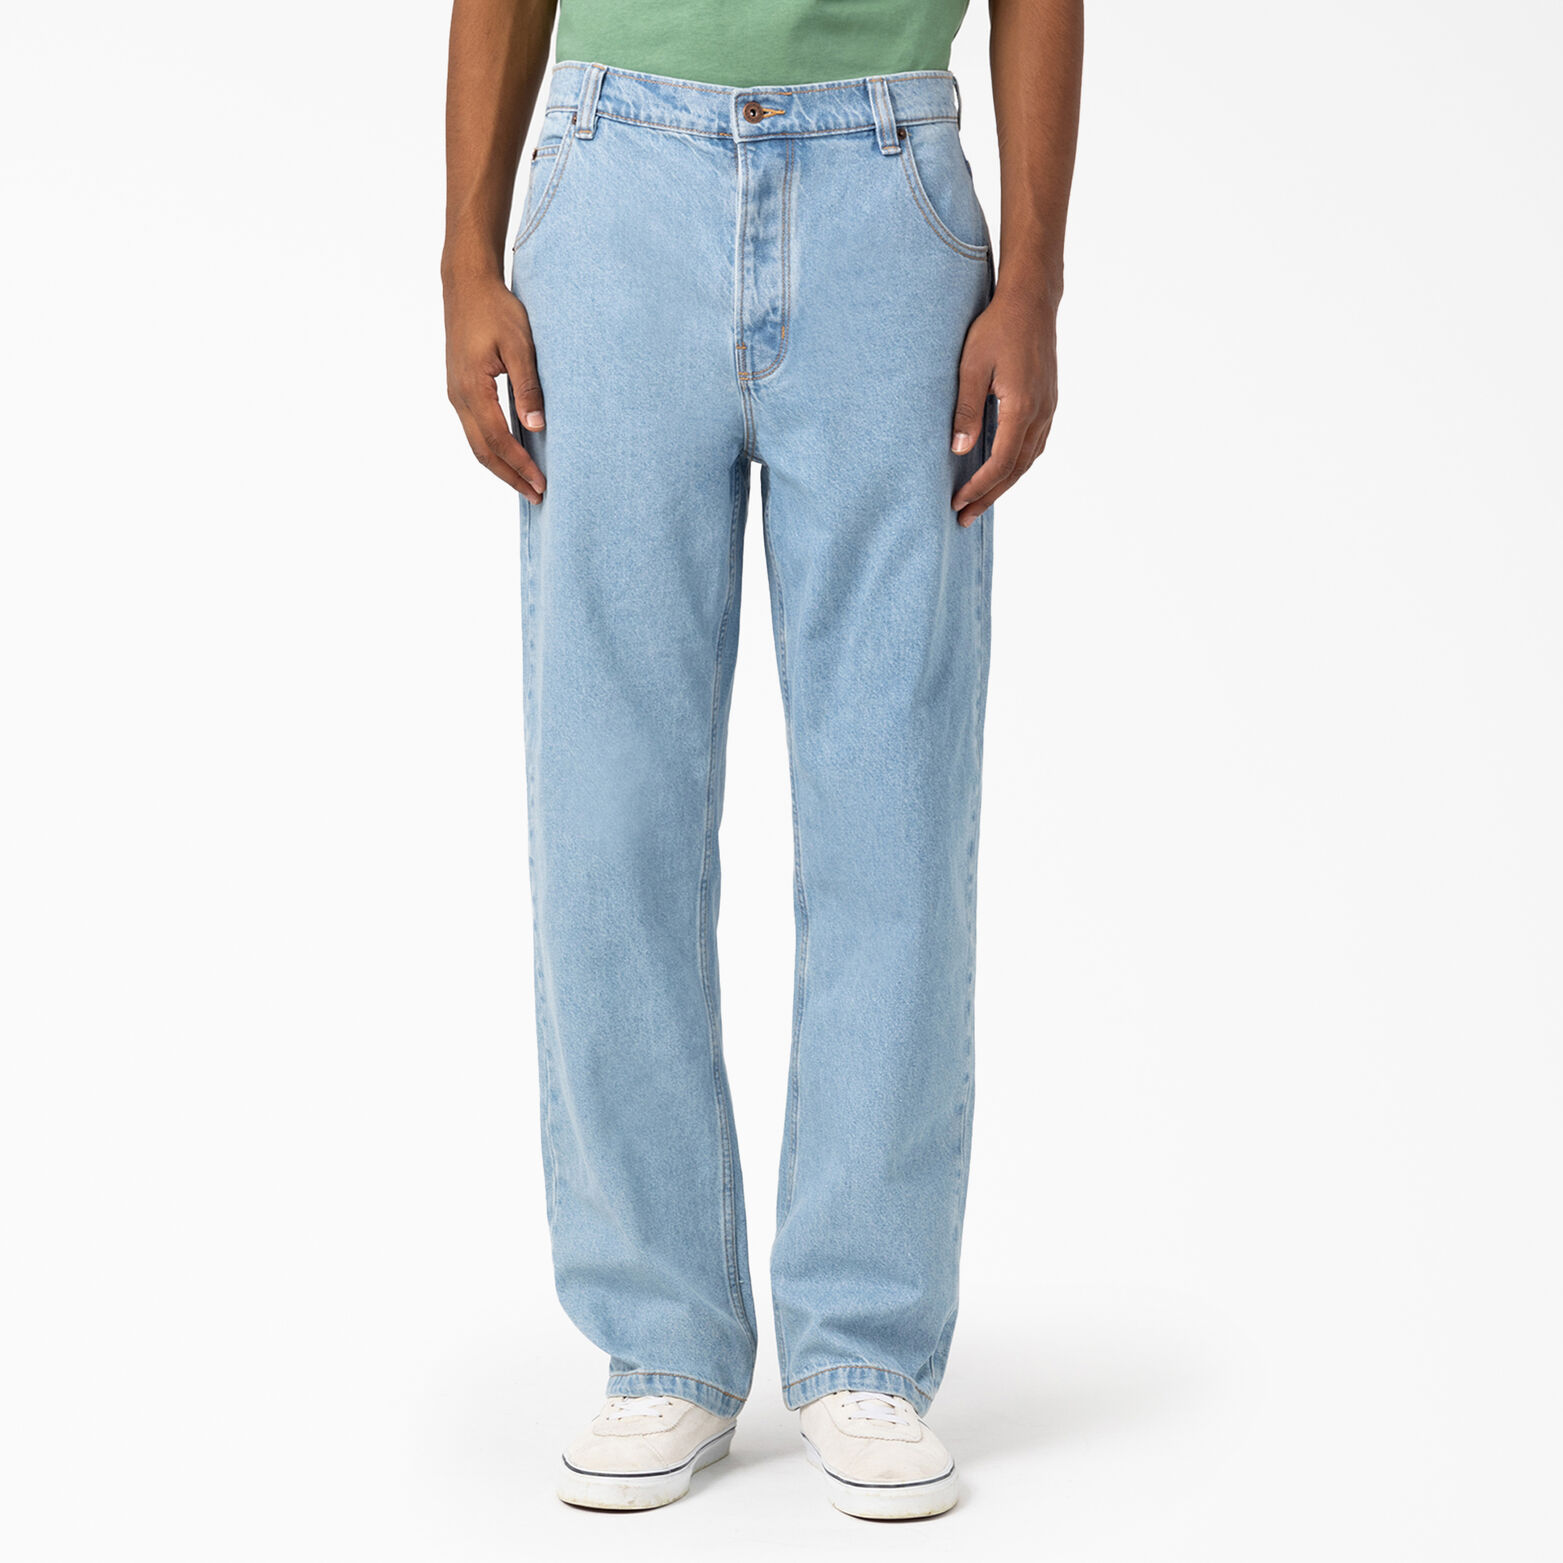 Thomasville Loose Fit Jeans - Dickies